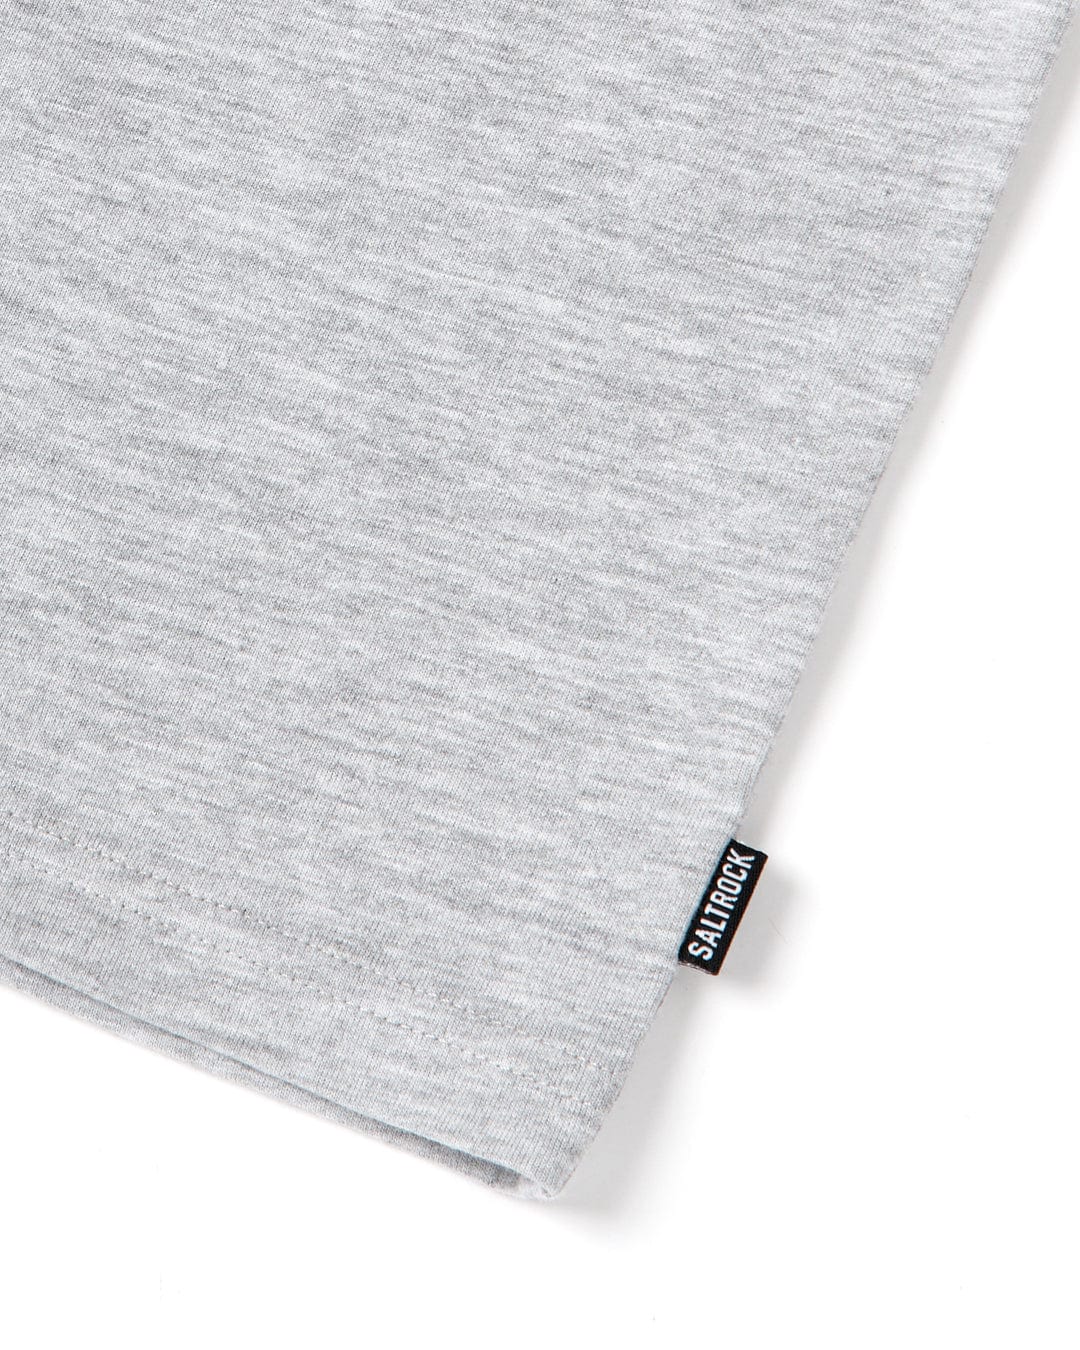 A close-up of a soft, gray fabric with a fine texture, featuring a small black and white Saltrock branding label on the lower right corner of the Saltrock Original - Mens Short Sleeve T-Shirt - Grey.